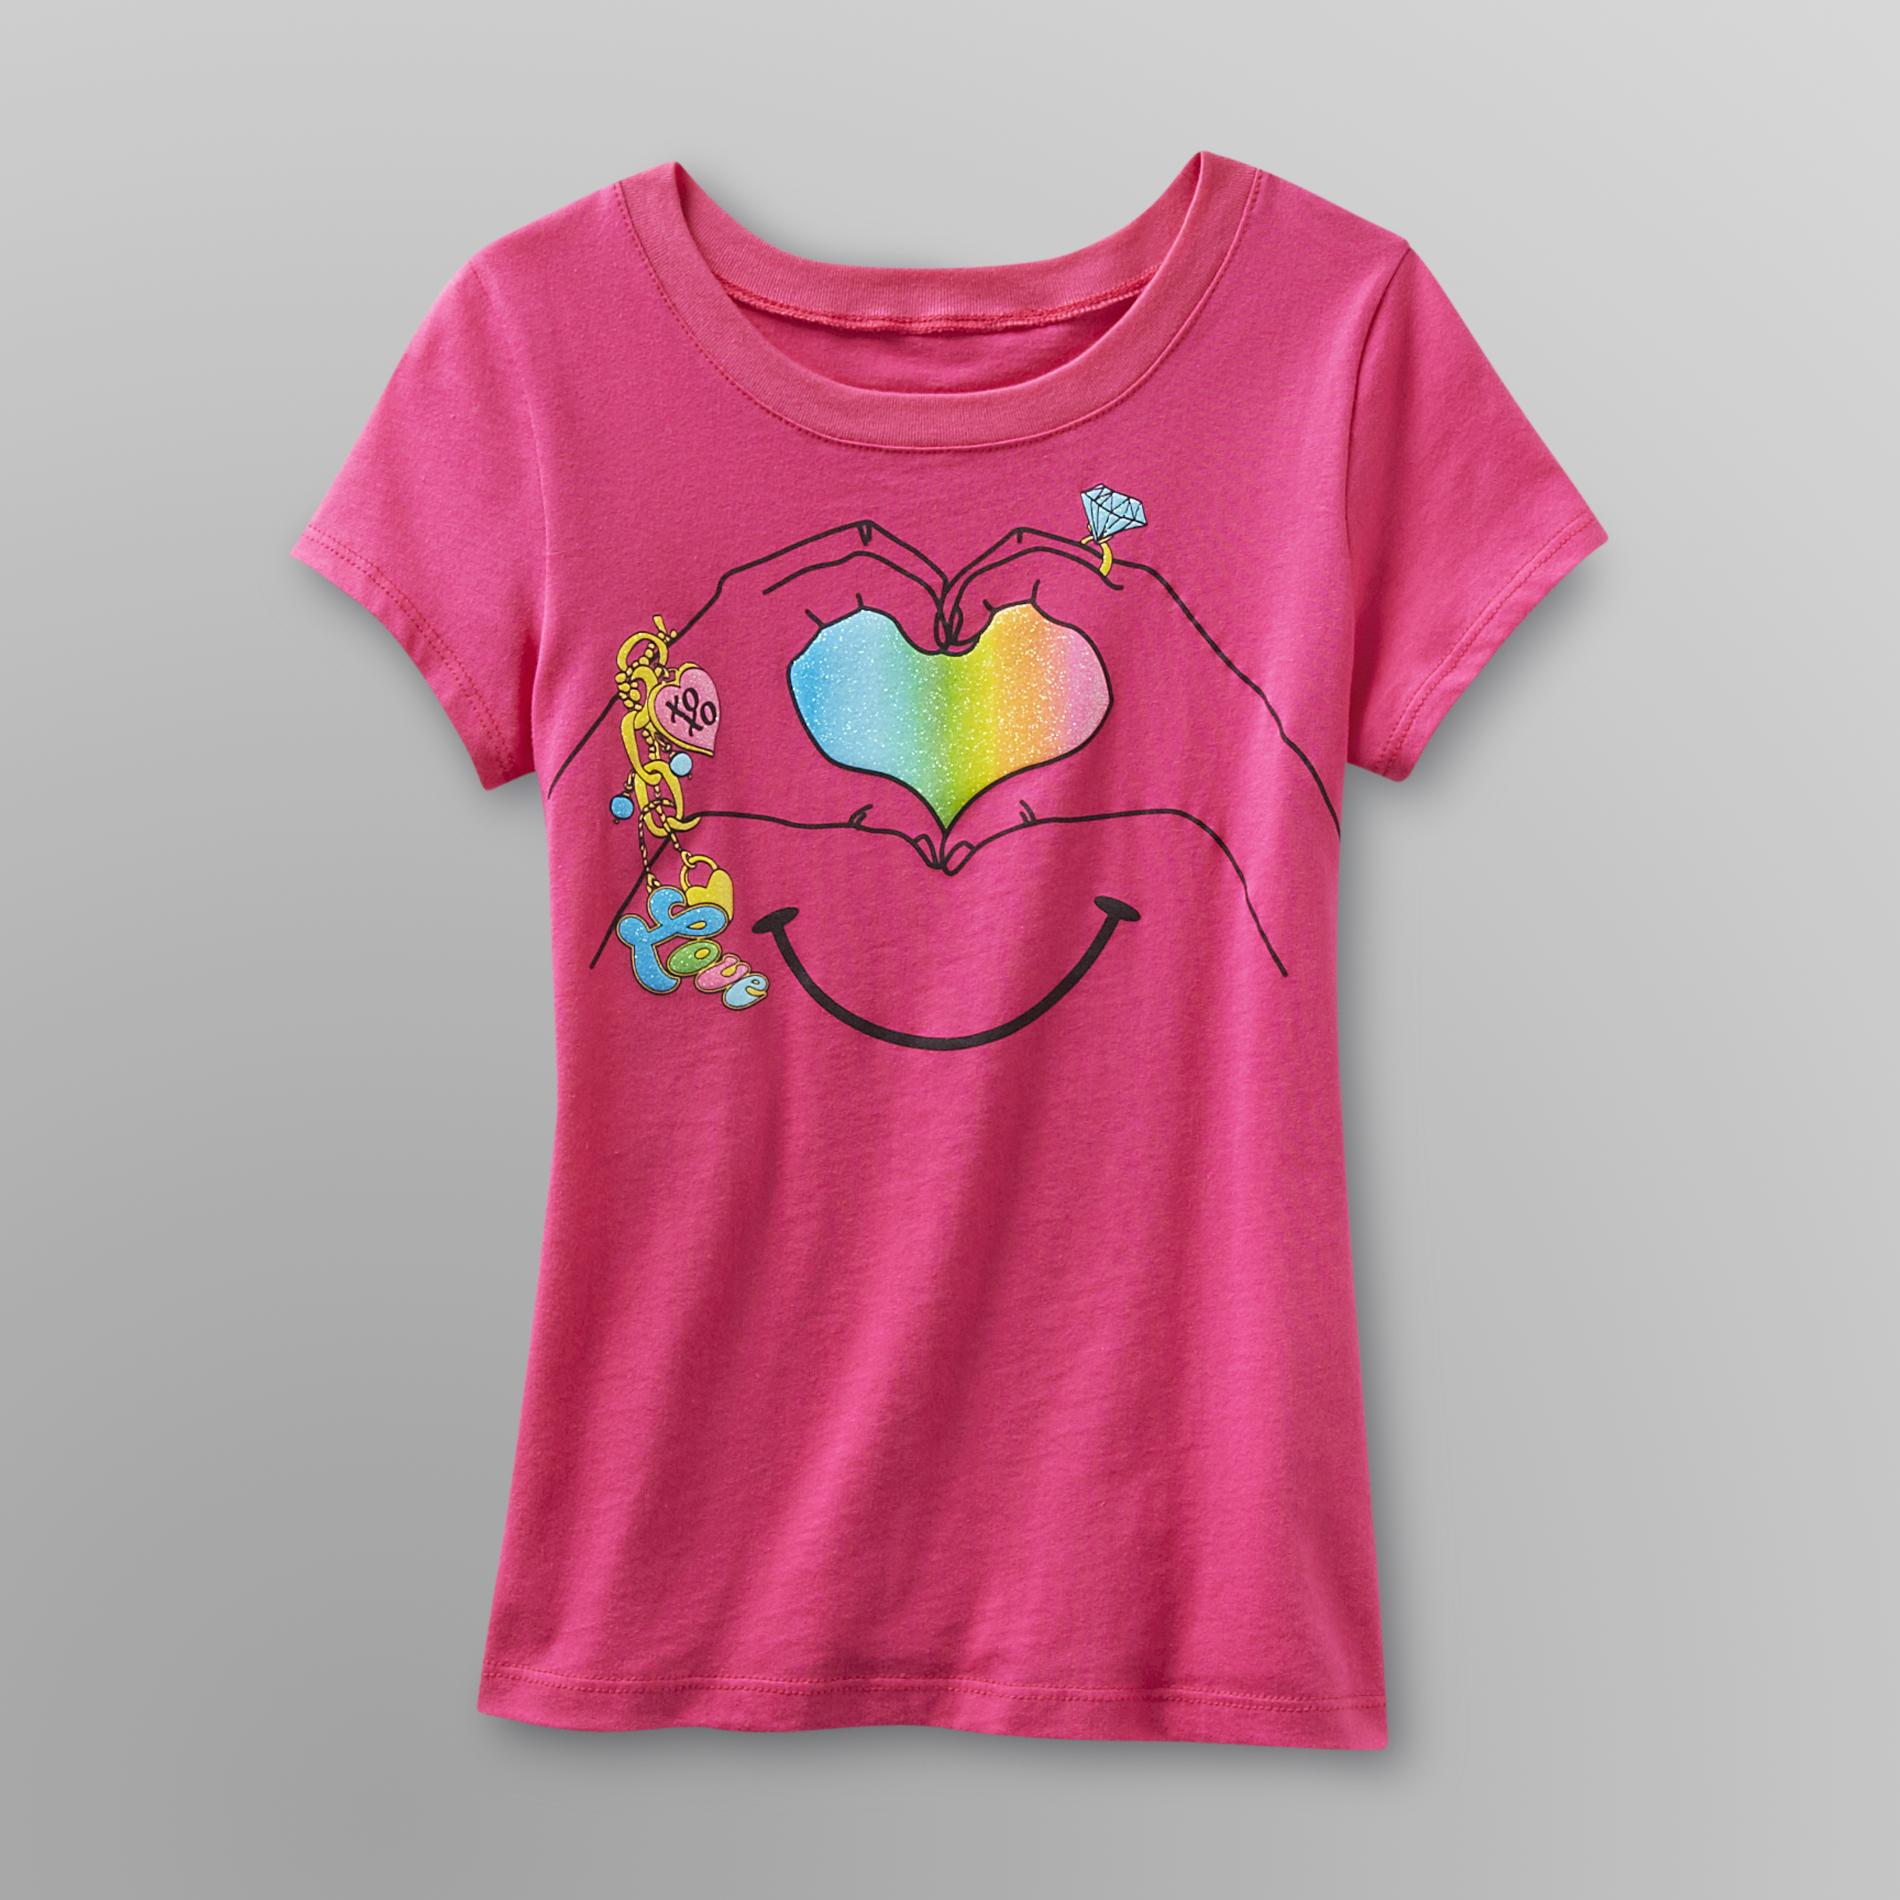 Route 66 Girl's Graphic T-Shirt - Rainbow Heart